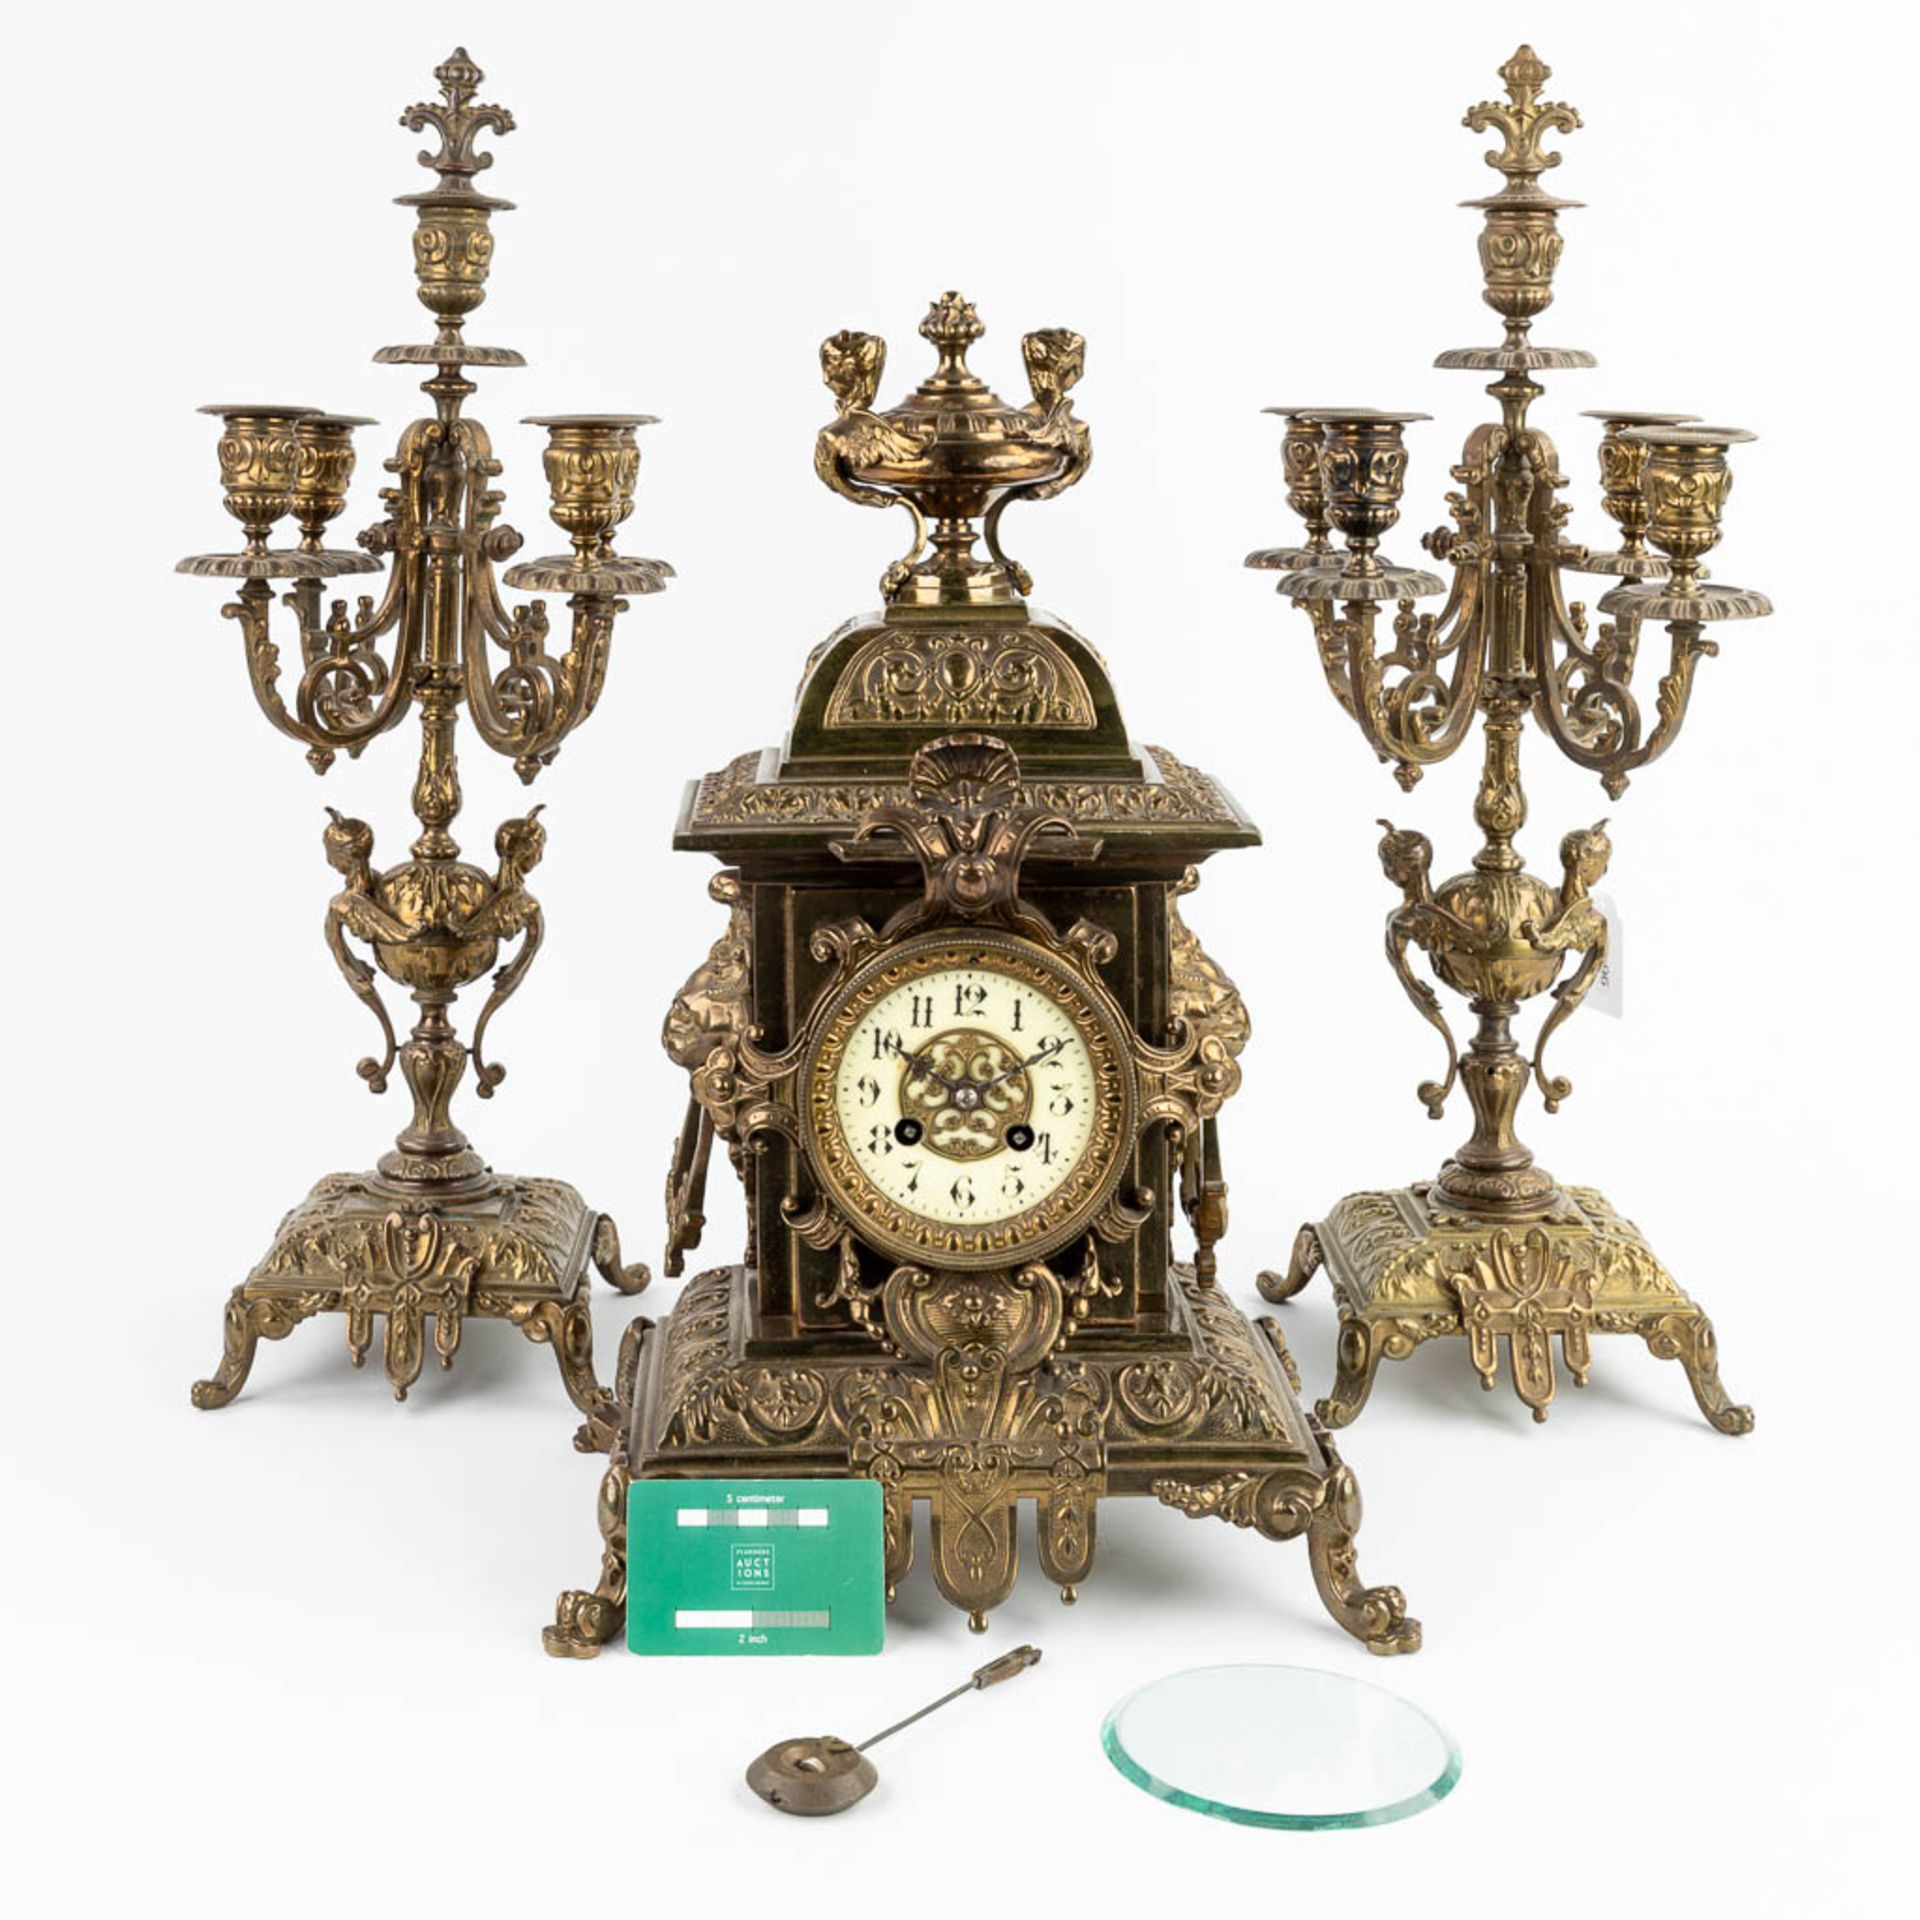 A three-piece mantle garniture clock and candelabra, made of bronze. (20 x 29 x 45cm) - Image 8 of 17